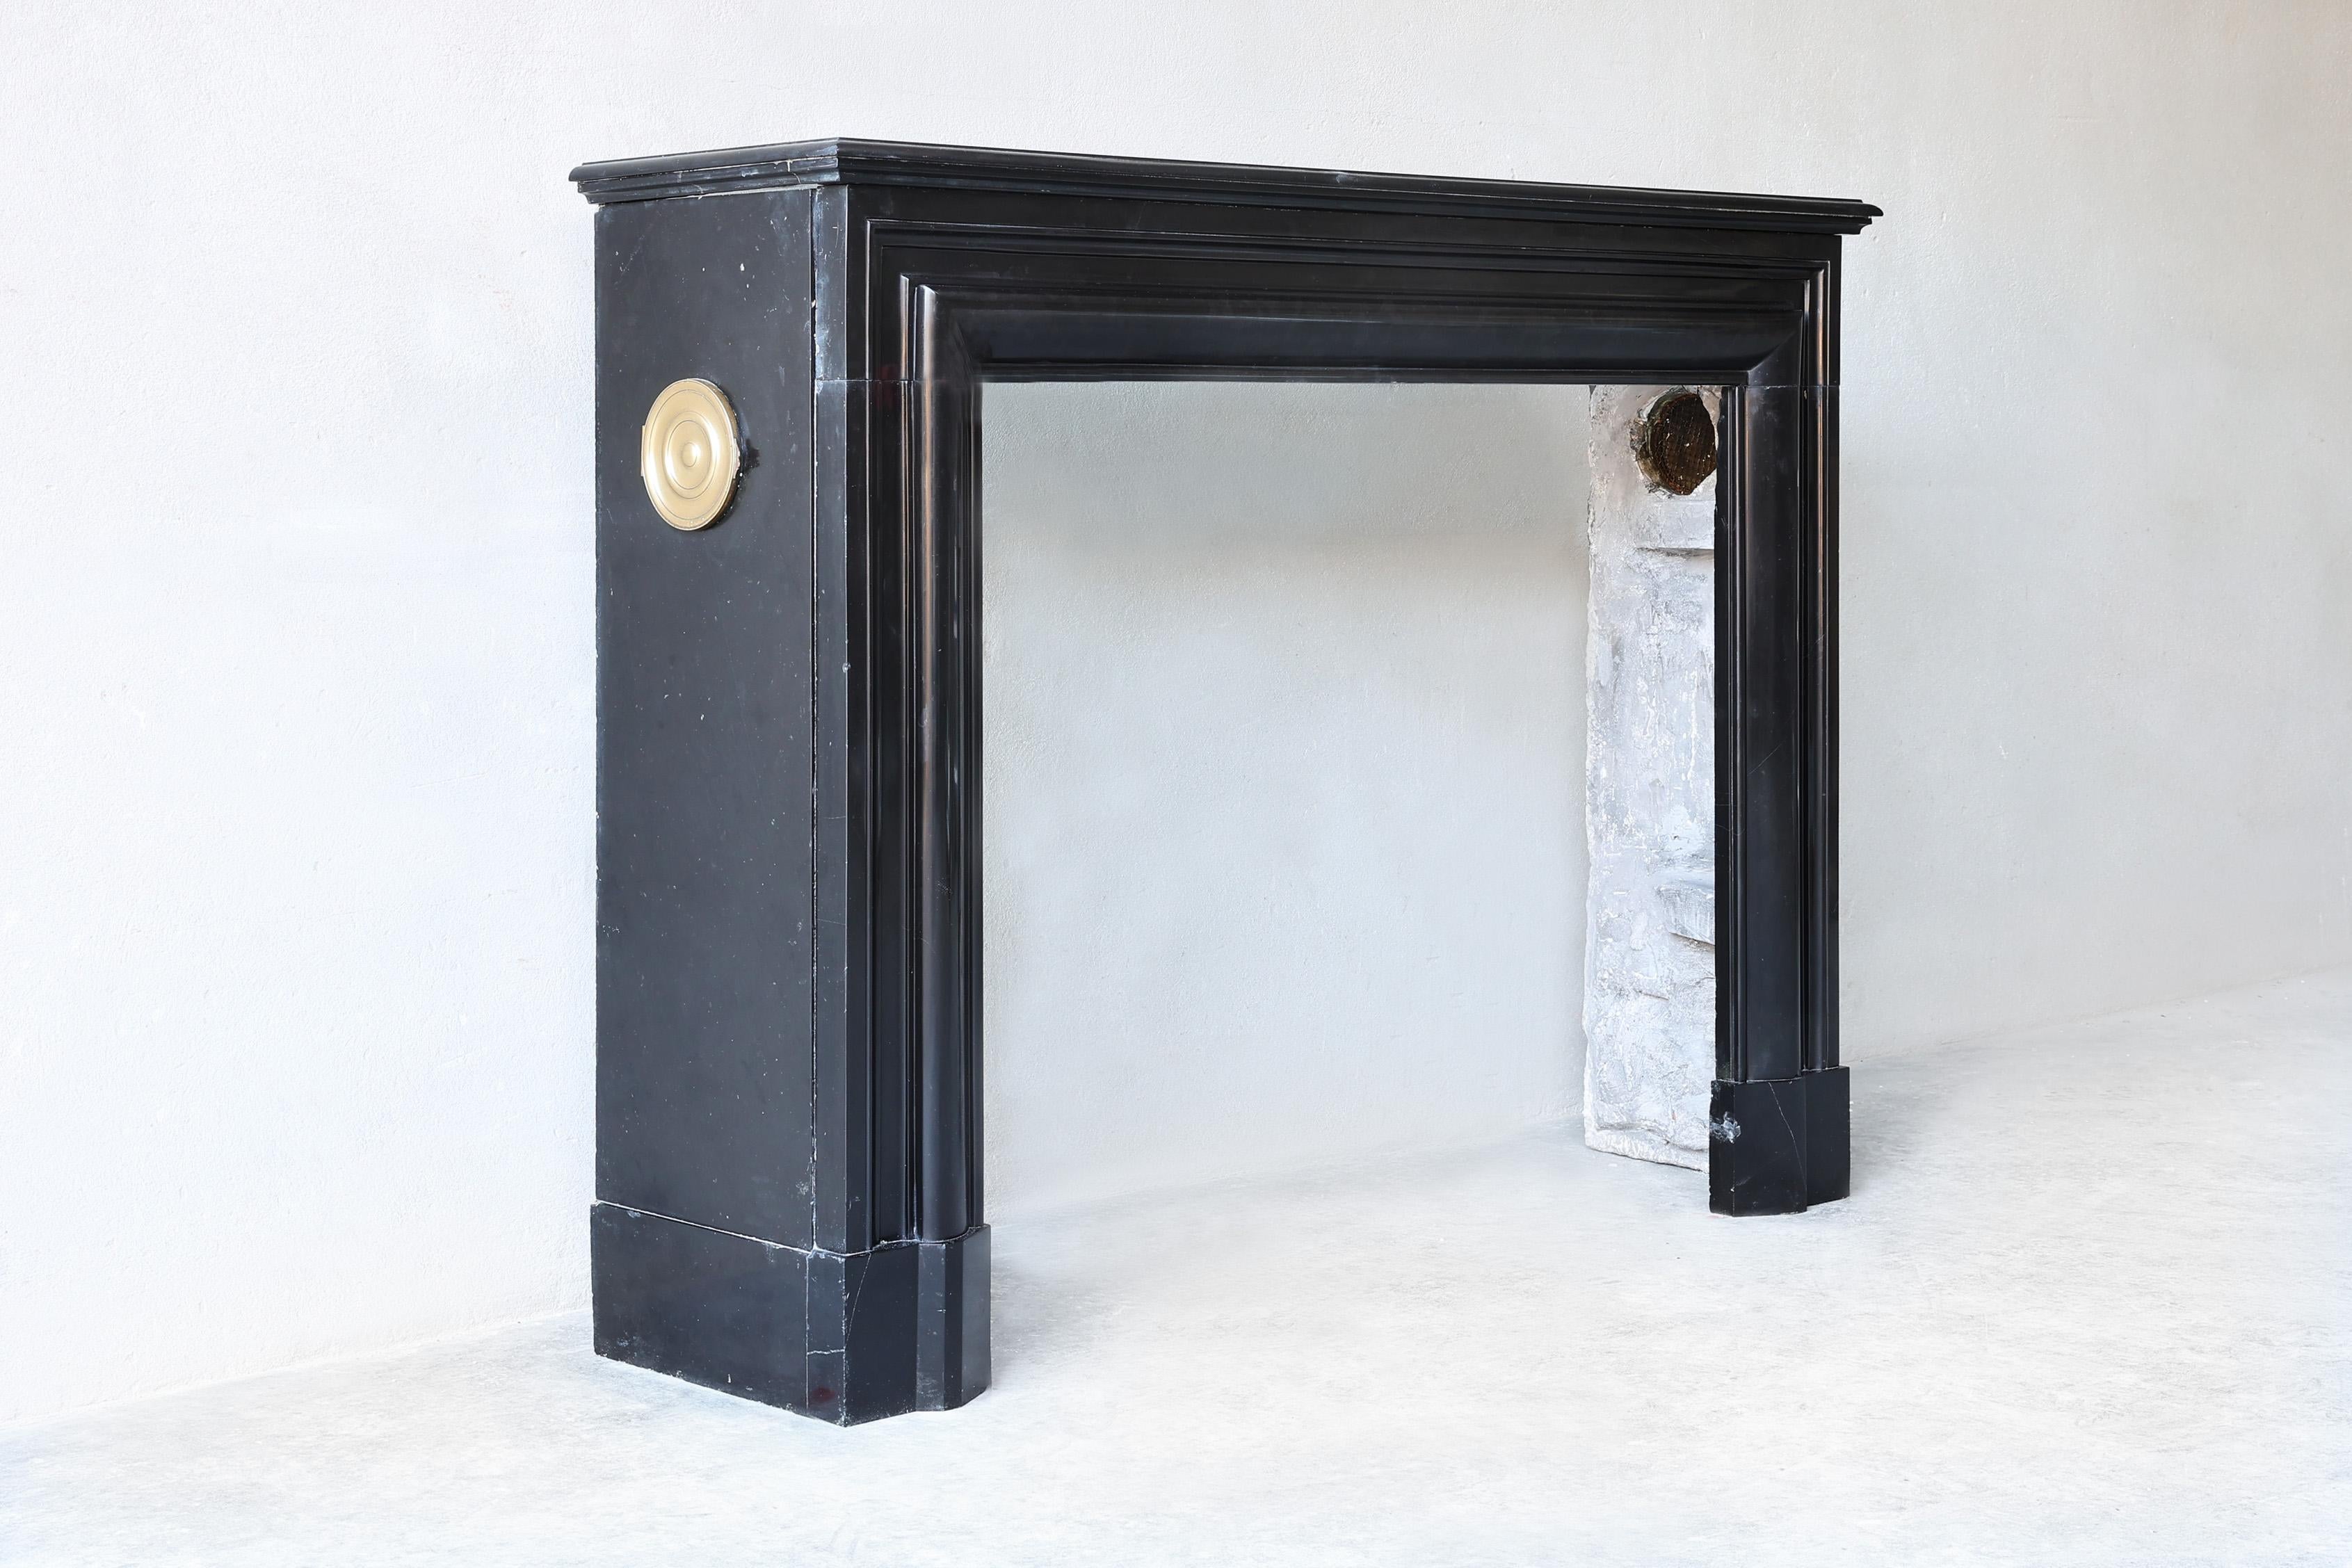 Very nice antique fireplace of the 'black gold' Noir de Mazy marble. Noir de Mazy fireplaces are one of the most popular styles of fireplaces. The quarries in Belgium where this marble comes from are now closed. This fireplace is in the style of